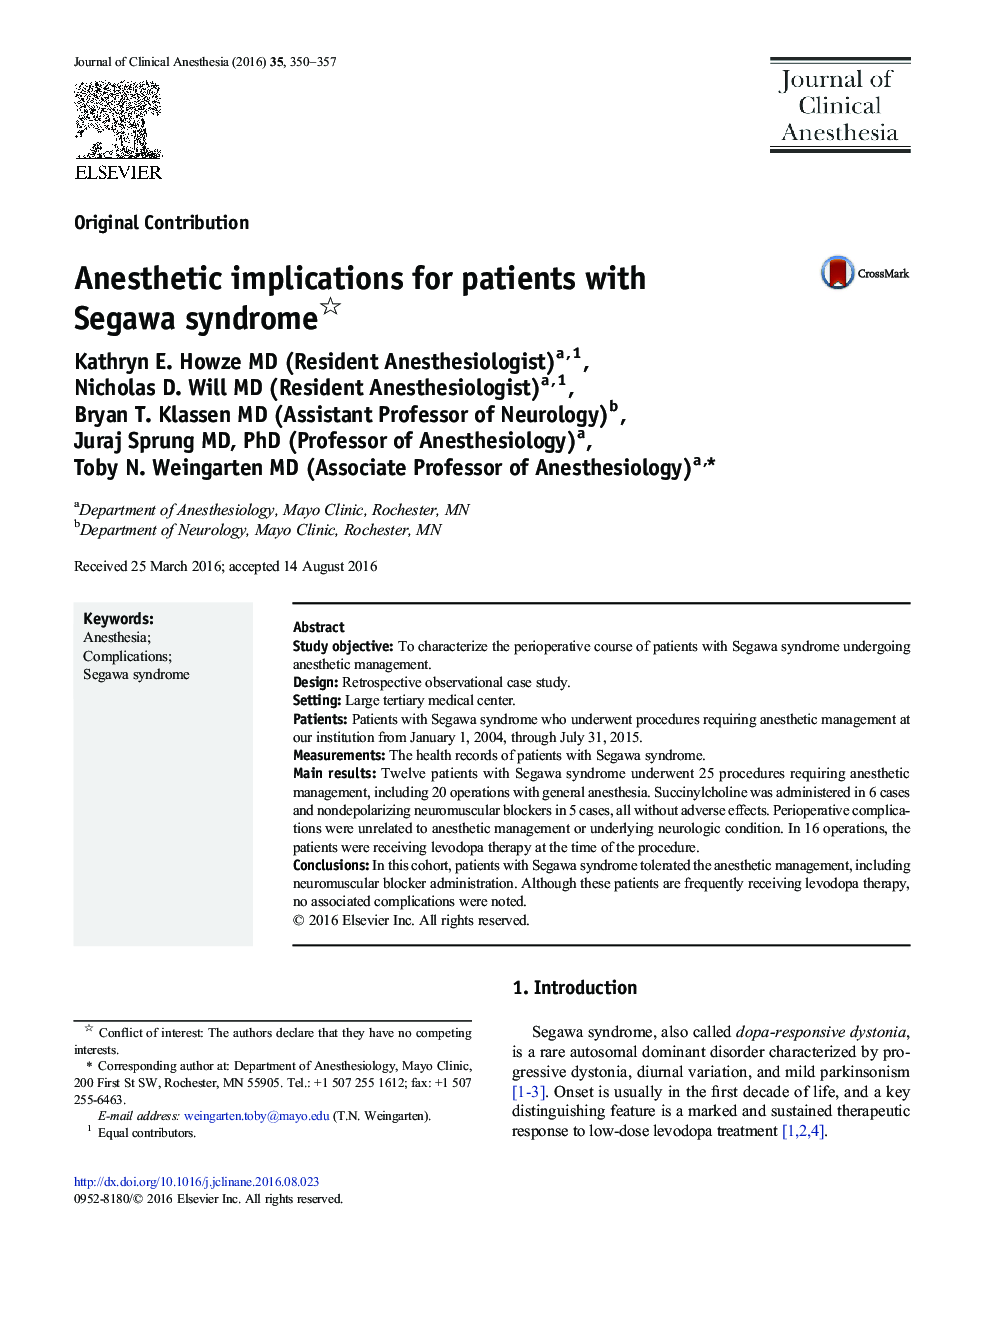 Anesthetic implications for patients with Segawa syndrome